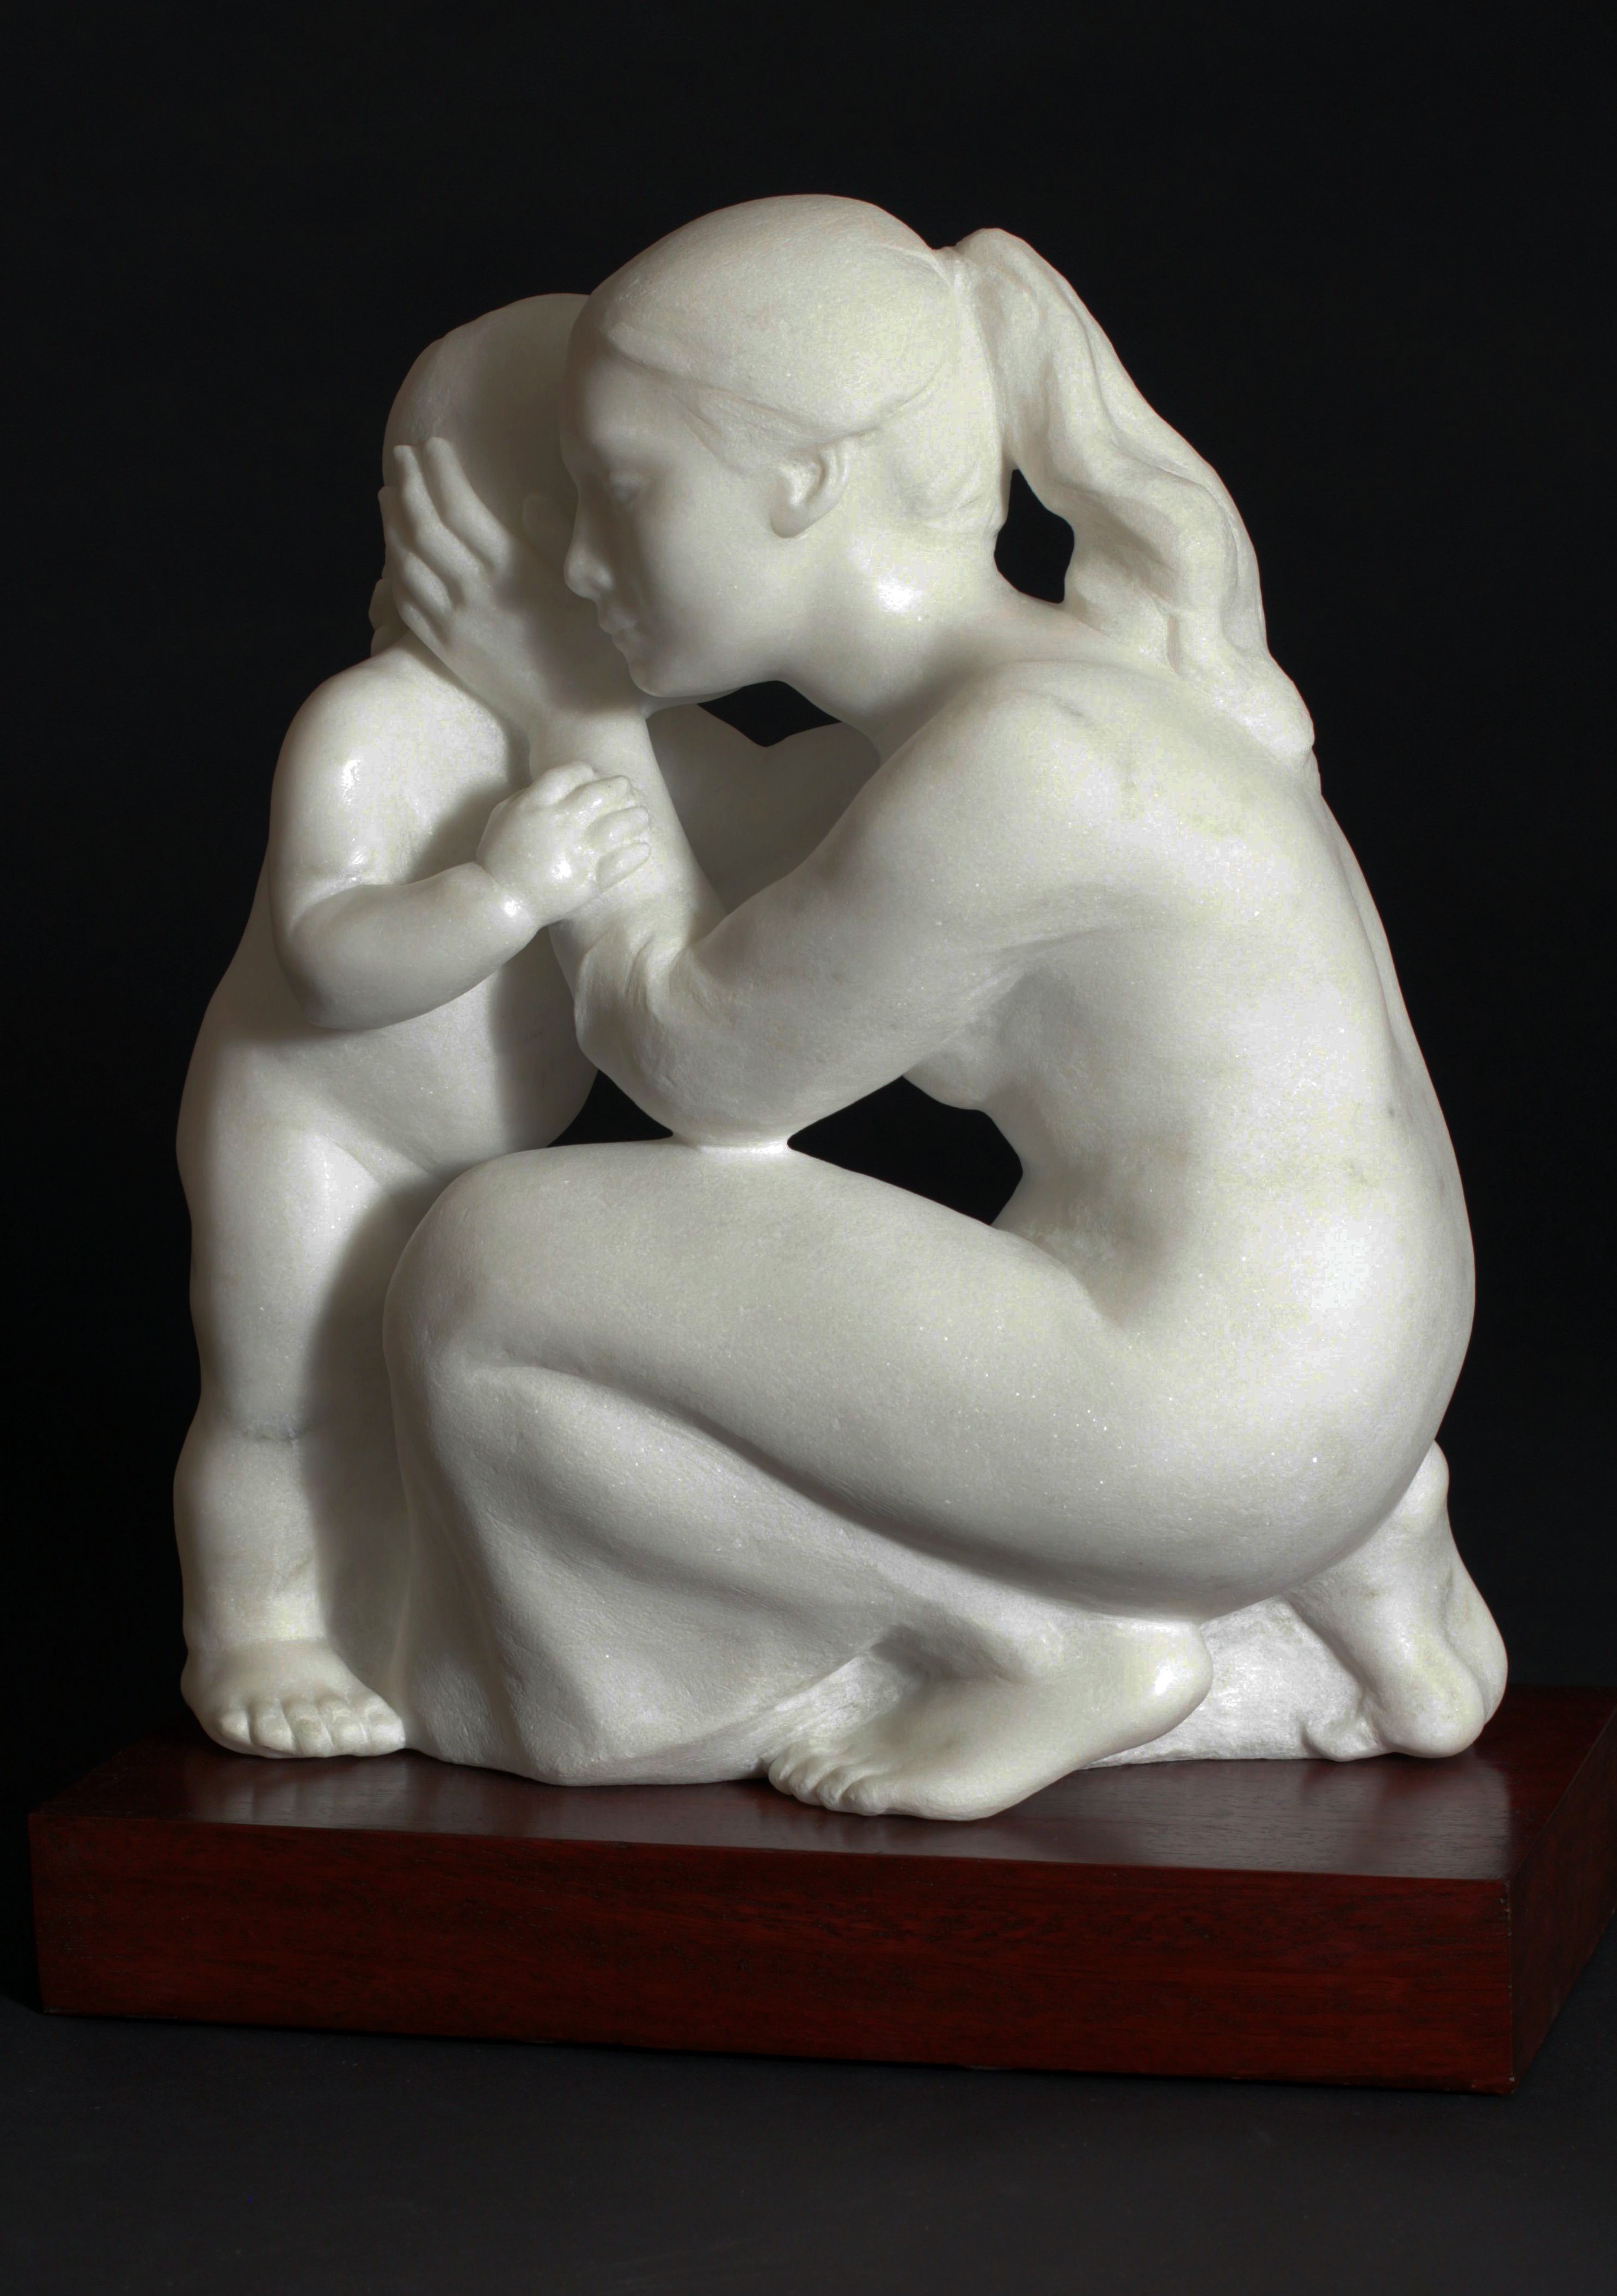 Young Mother, marble, direct carving, 23 x 19 x 10 inches